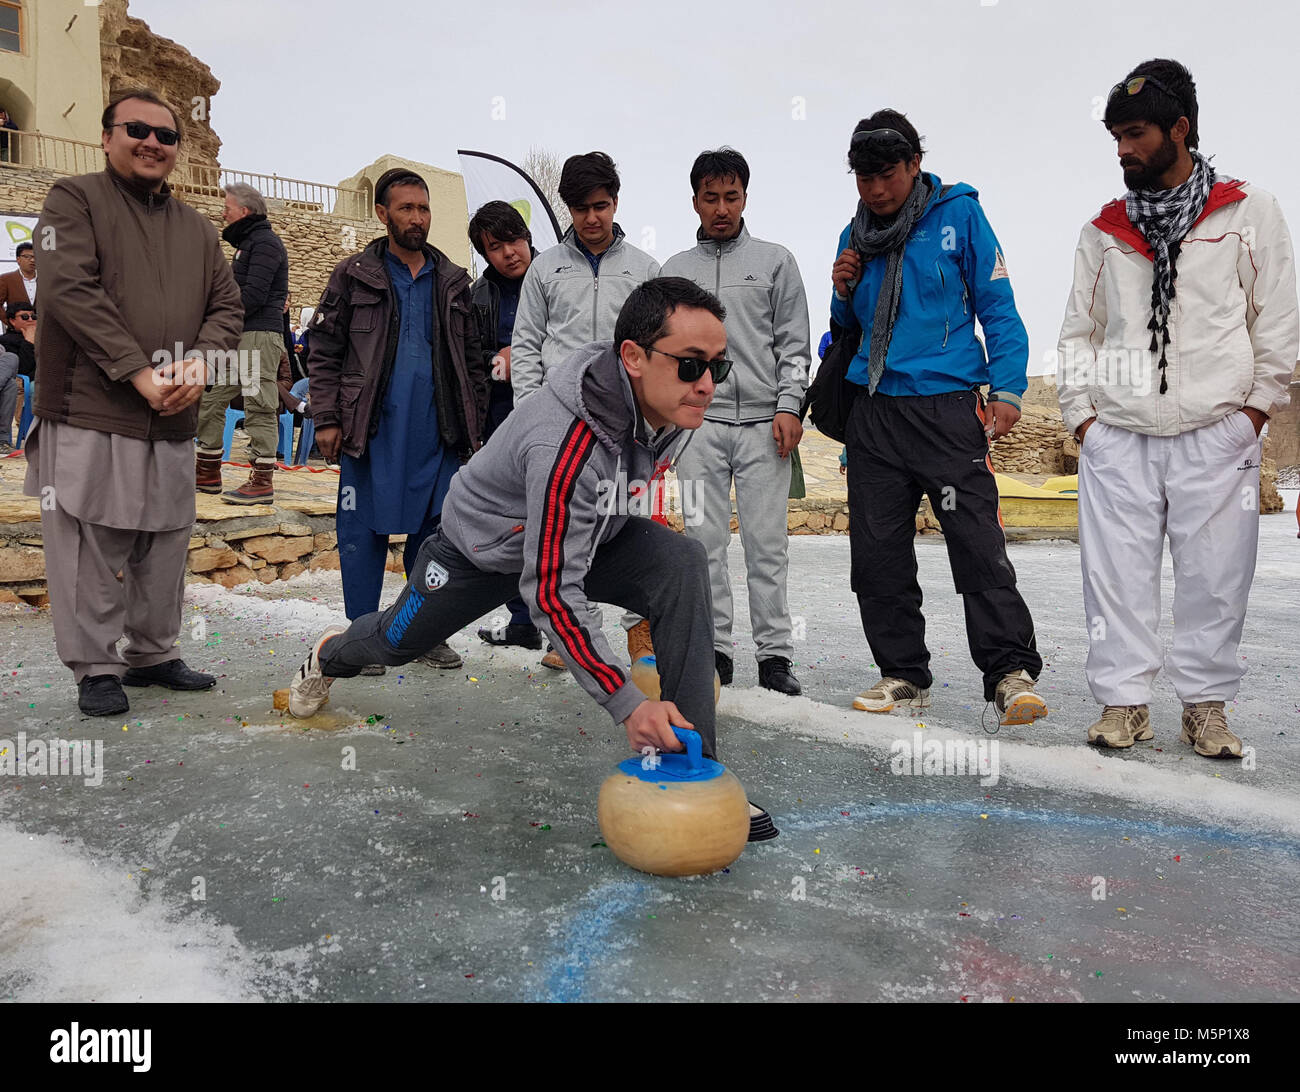 (180225) -- BAMYAN, Feb. 25 (Xinhua) -- A man plays curling during a winter game festival in Bamyan province, Afghanistan, Feb. 23. 2018. Stock Photo